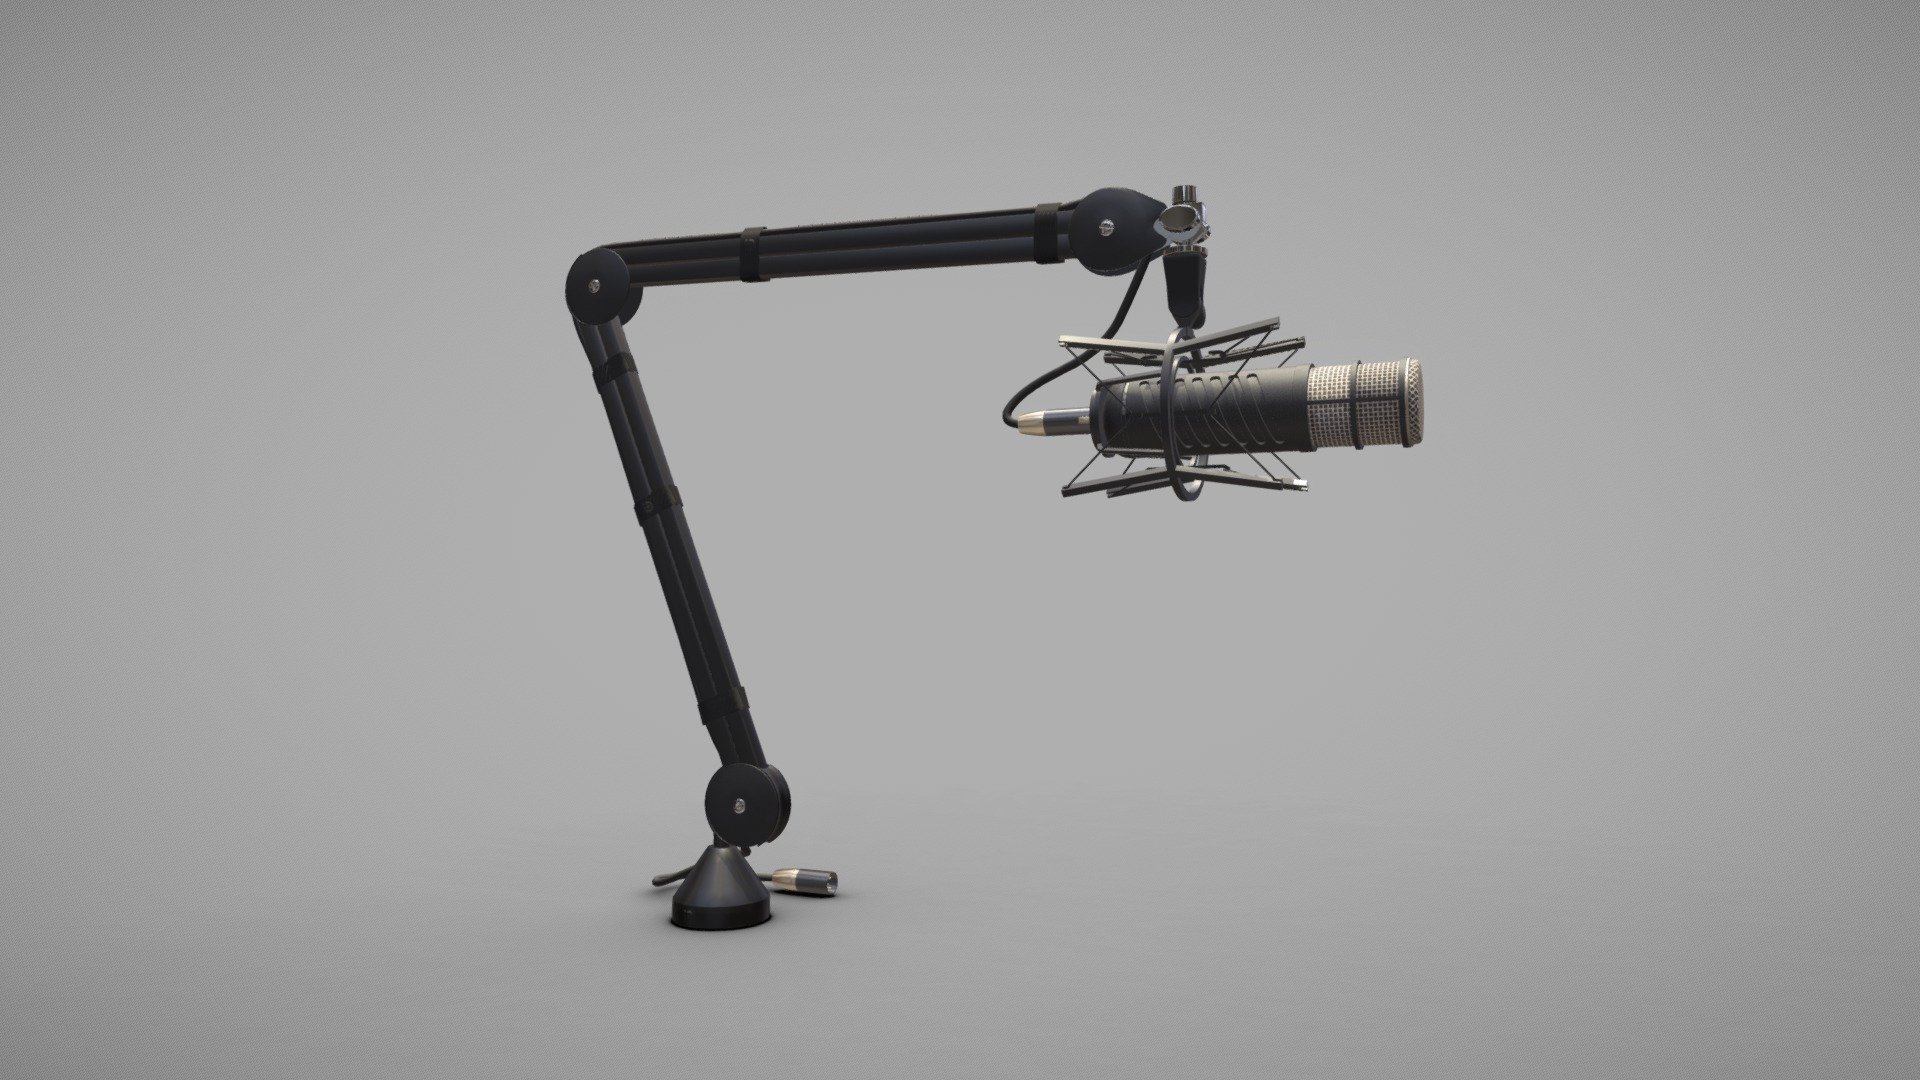 Microphone &amp; Boom Arm example model created for forthcoming Studio Asset Pack, for use primarliy in UE4 /UE5.

Modelled in Cinema 4D &amp; textured in Substance Painter.

Mid Poly Model, suitable for Console / PC development &amp; offline rendered projects. Not optimised for VR / Low Target Mobile.

Uploaded Example Features:




100% Quad Topology

4K Texture Maps

Fully Unwrapped non- overlapping UV’s

Consistent Texel Density

Thanks for checking out our work. Please follow us to keep informed about all of our forthcoming asset pack releases - Microphone and Boom Arm - 3D model by immersive-b 3d model